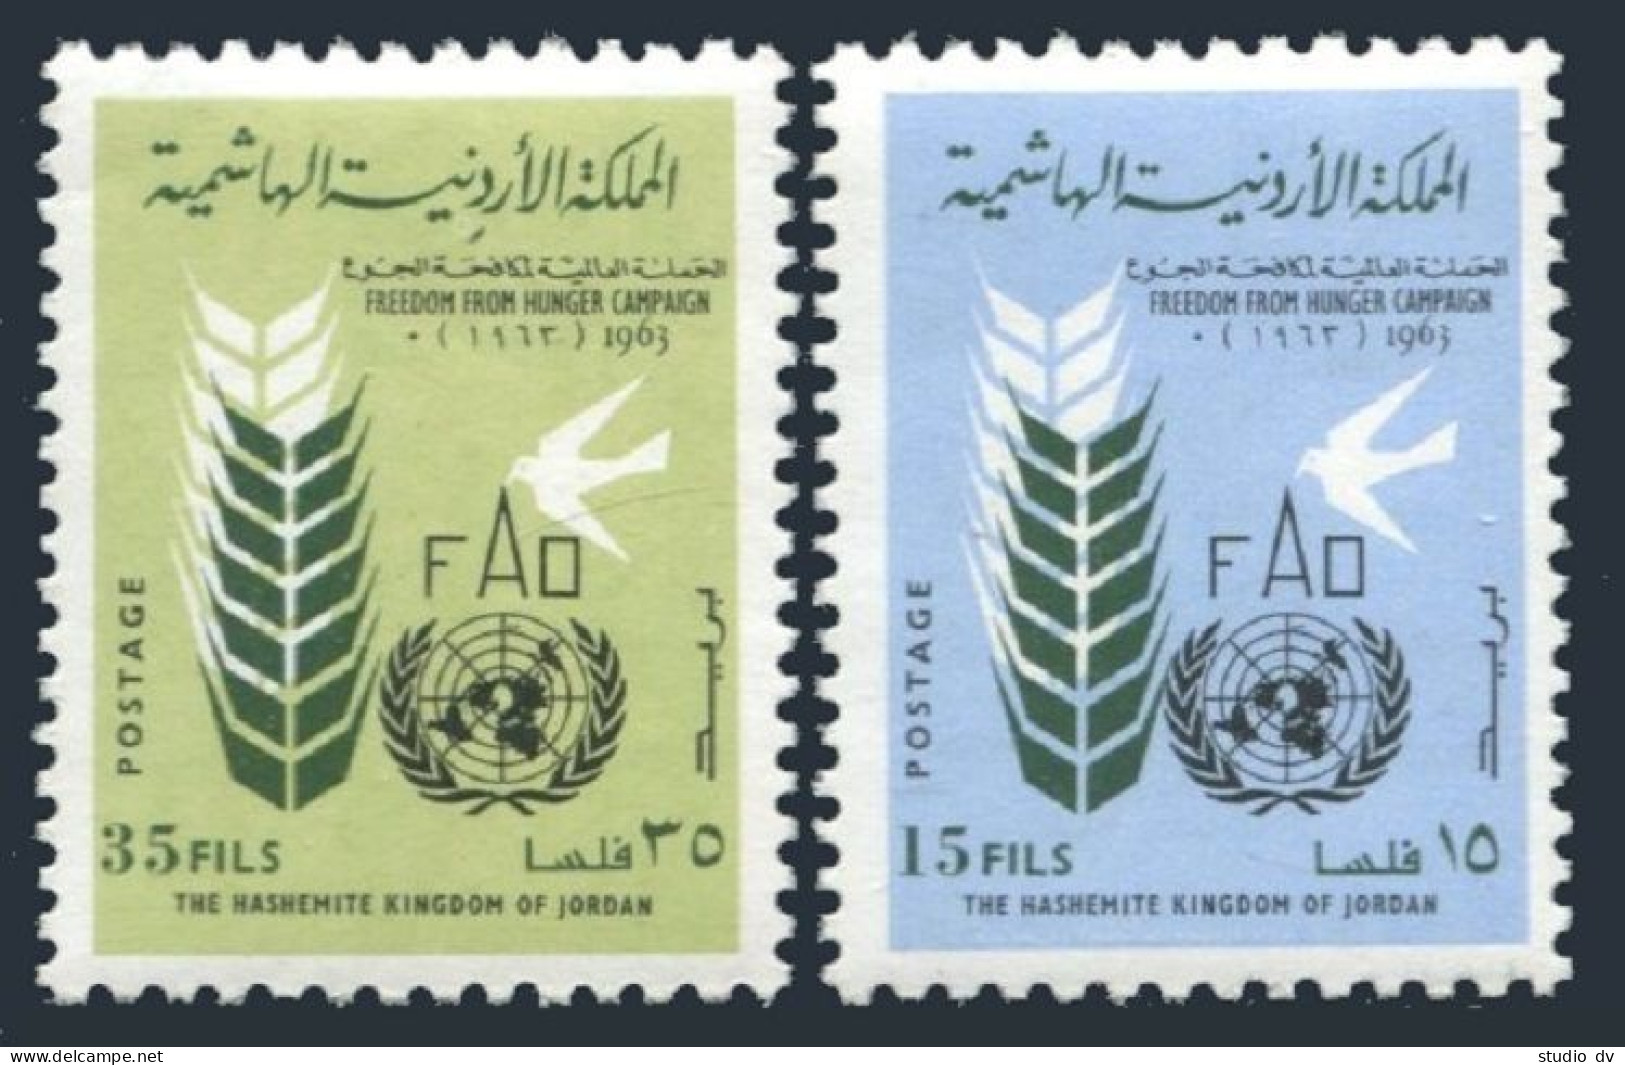 Jordan 398-399,399a & Imperf, MNH. FAO Freedom From Hunger Campaign 1963. - Jordanie